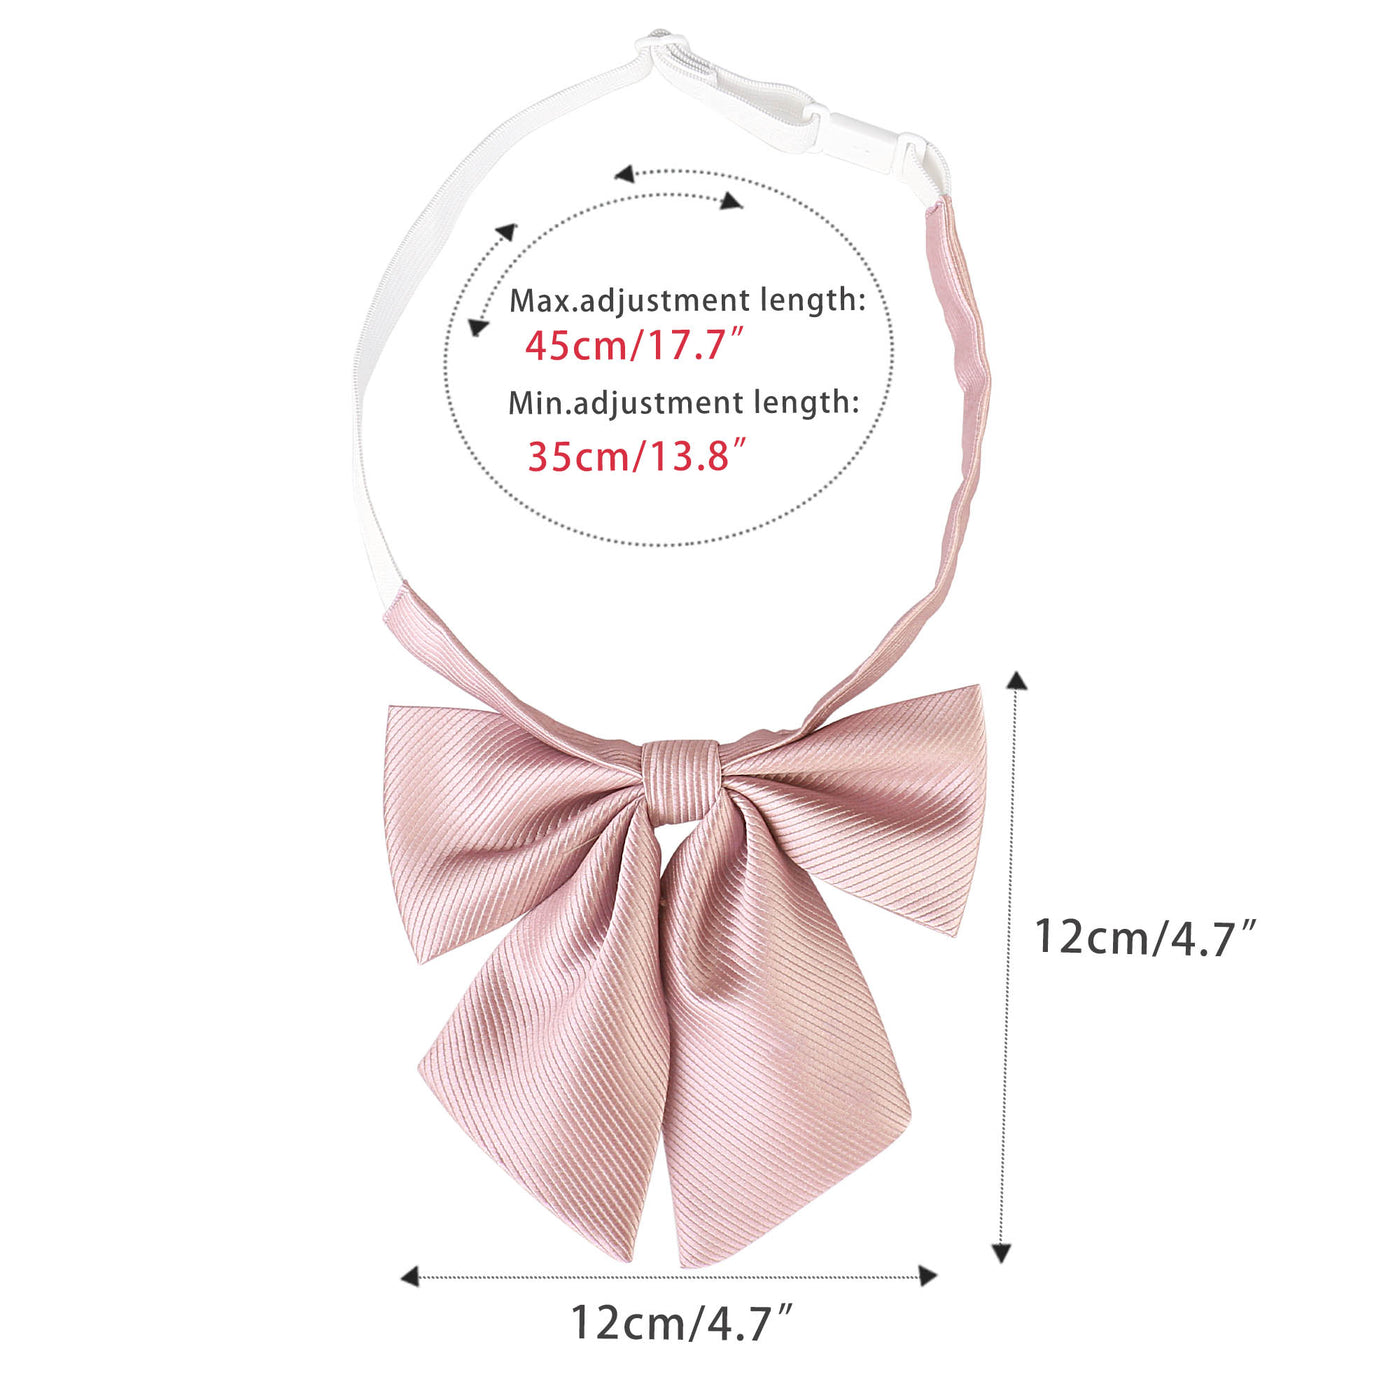 Bublédon Women's Solid Color Pre-Tied Bow Tie Adjustable Bowknot Bowties for Cosplay Uniform